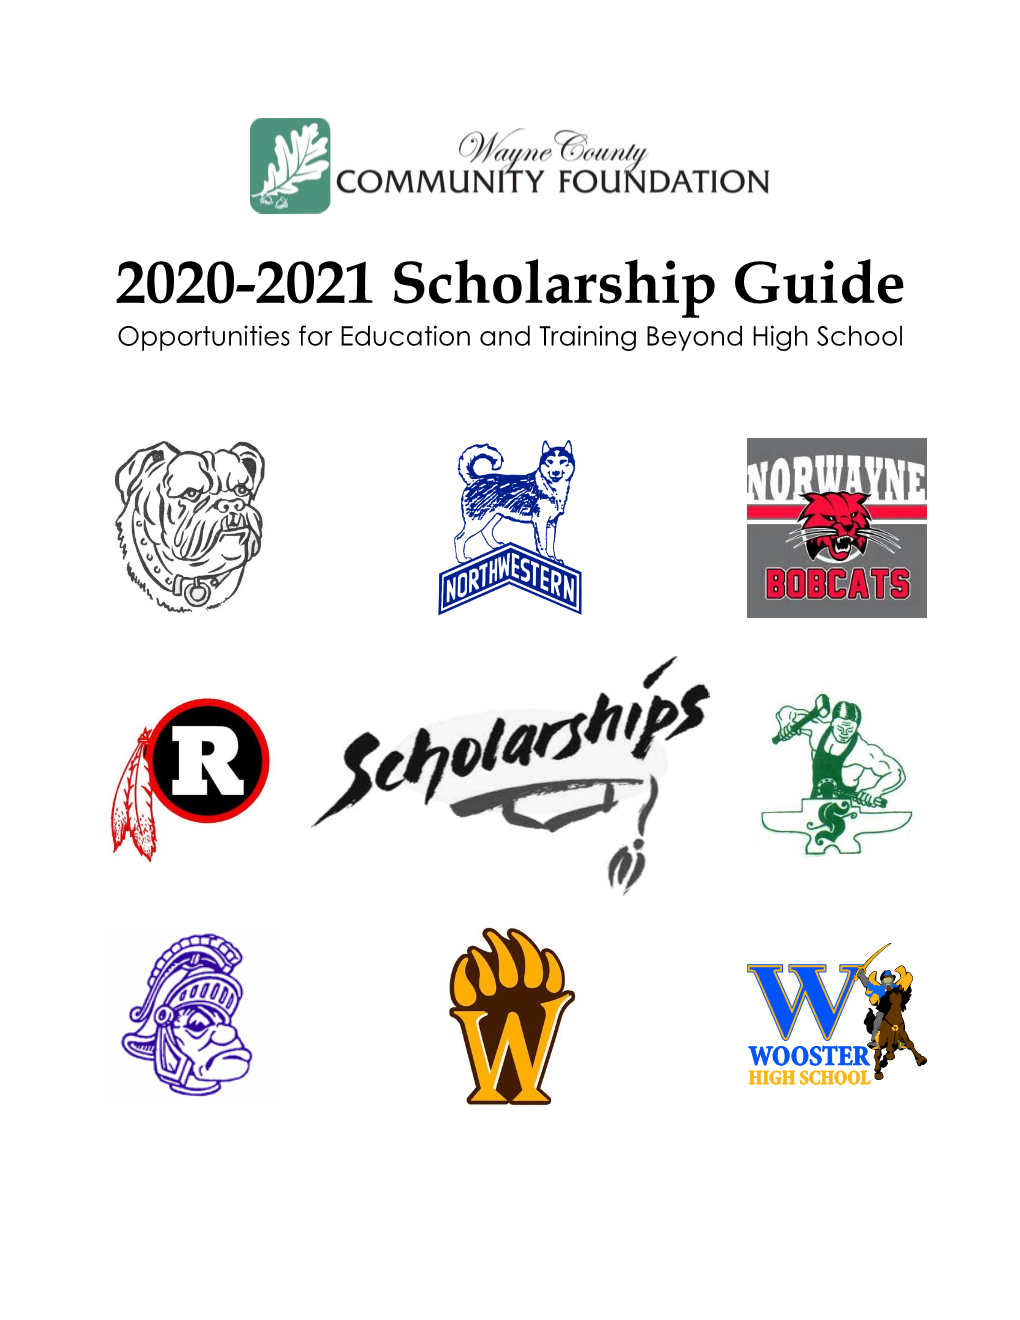 2020-2021 Scholarship Guide Opportunities for Education and Training Beyond High School